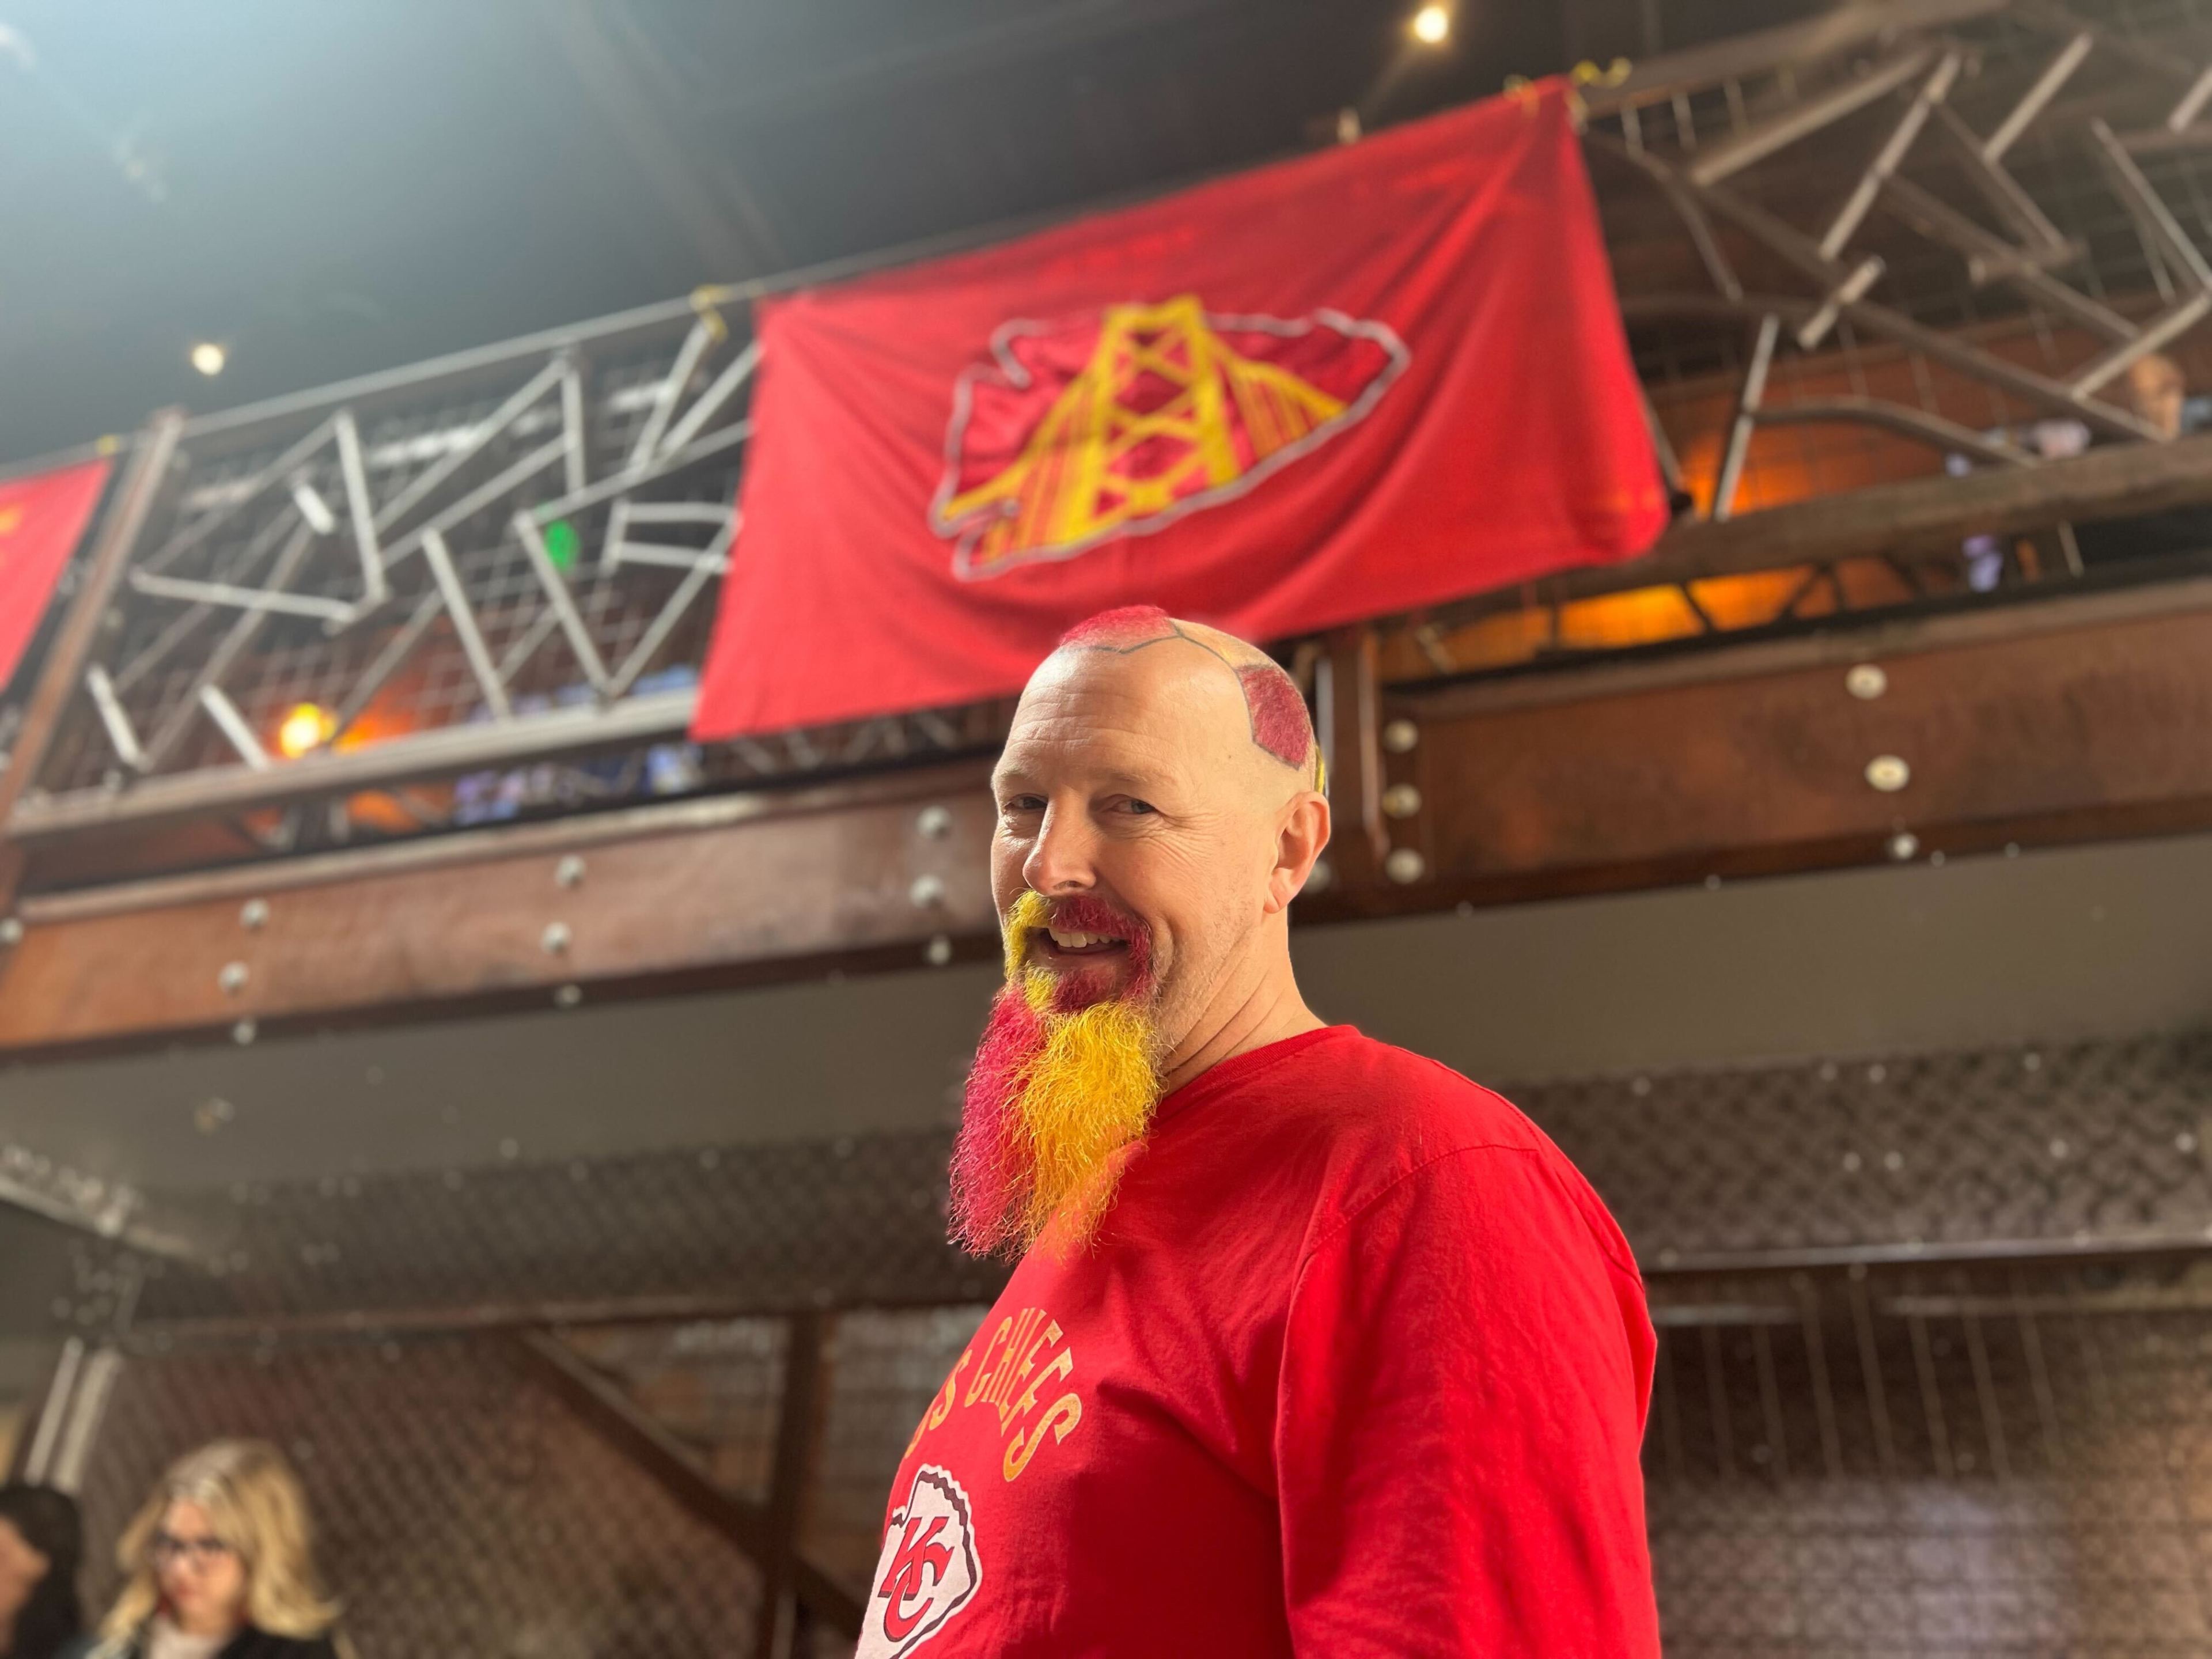 A man with a dyed red and yellow beard smiles, wearing a red shirt with &quot;Chiefs&quot; on it; a team flag hangs in the background.